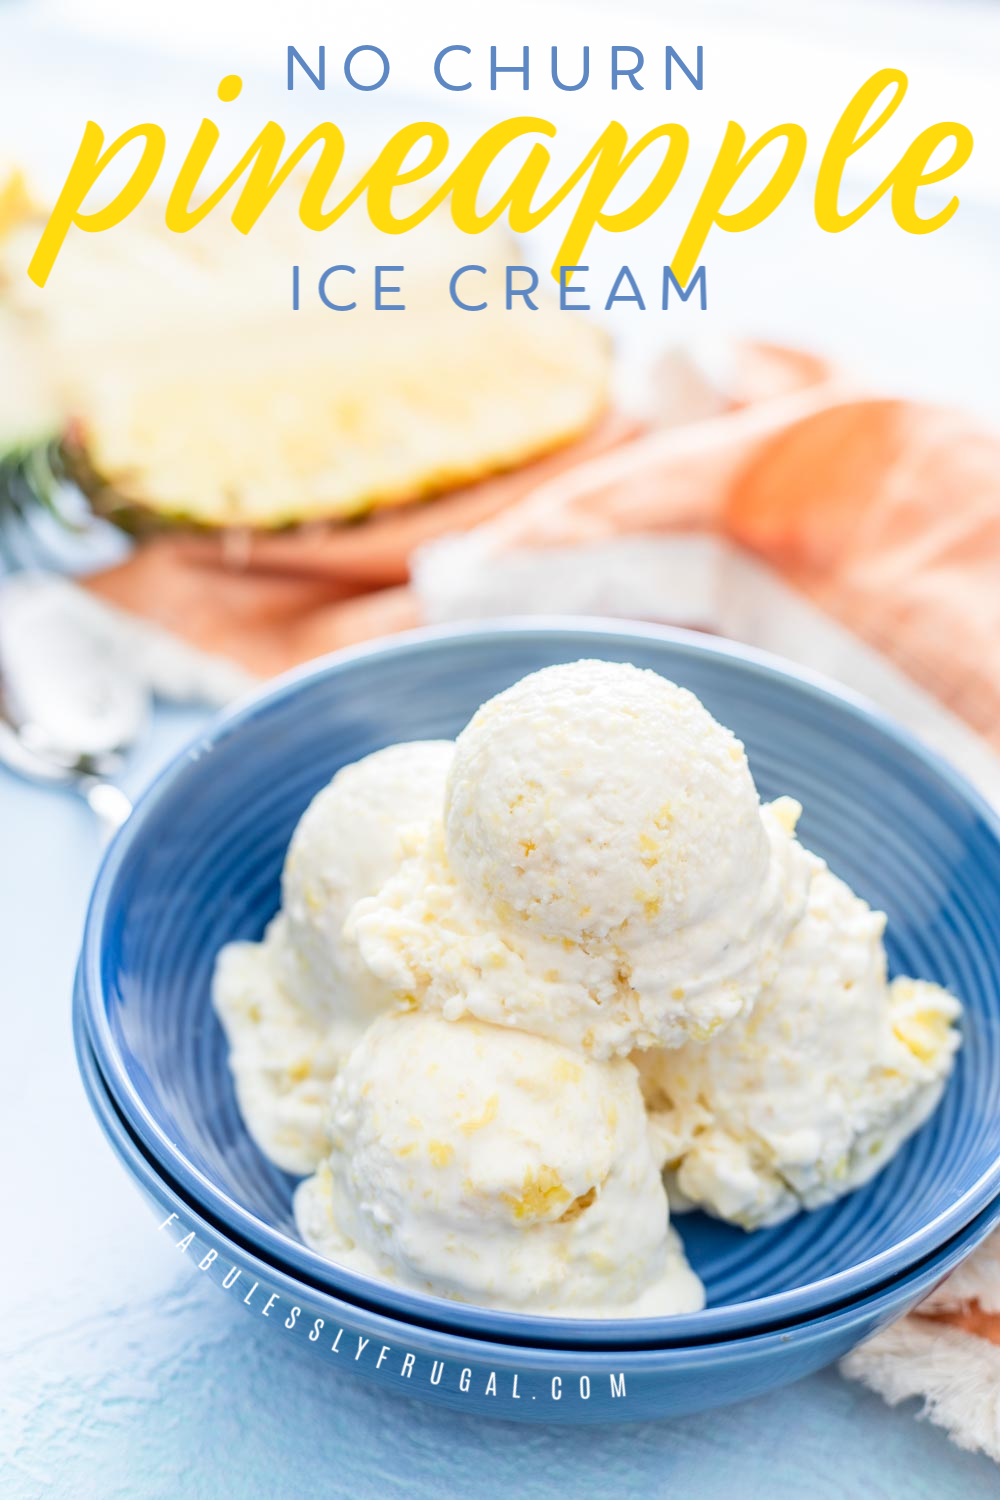 How to make homemade pineapple ice cream without a machine